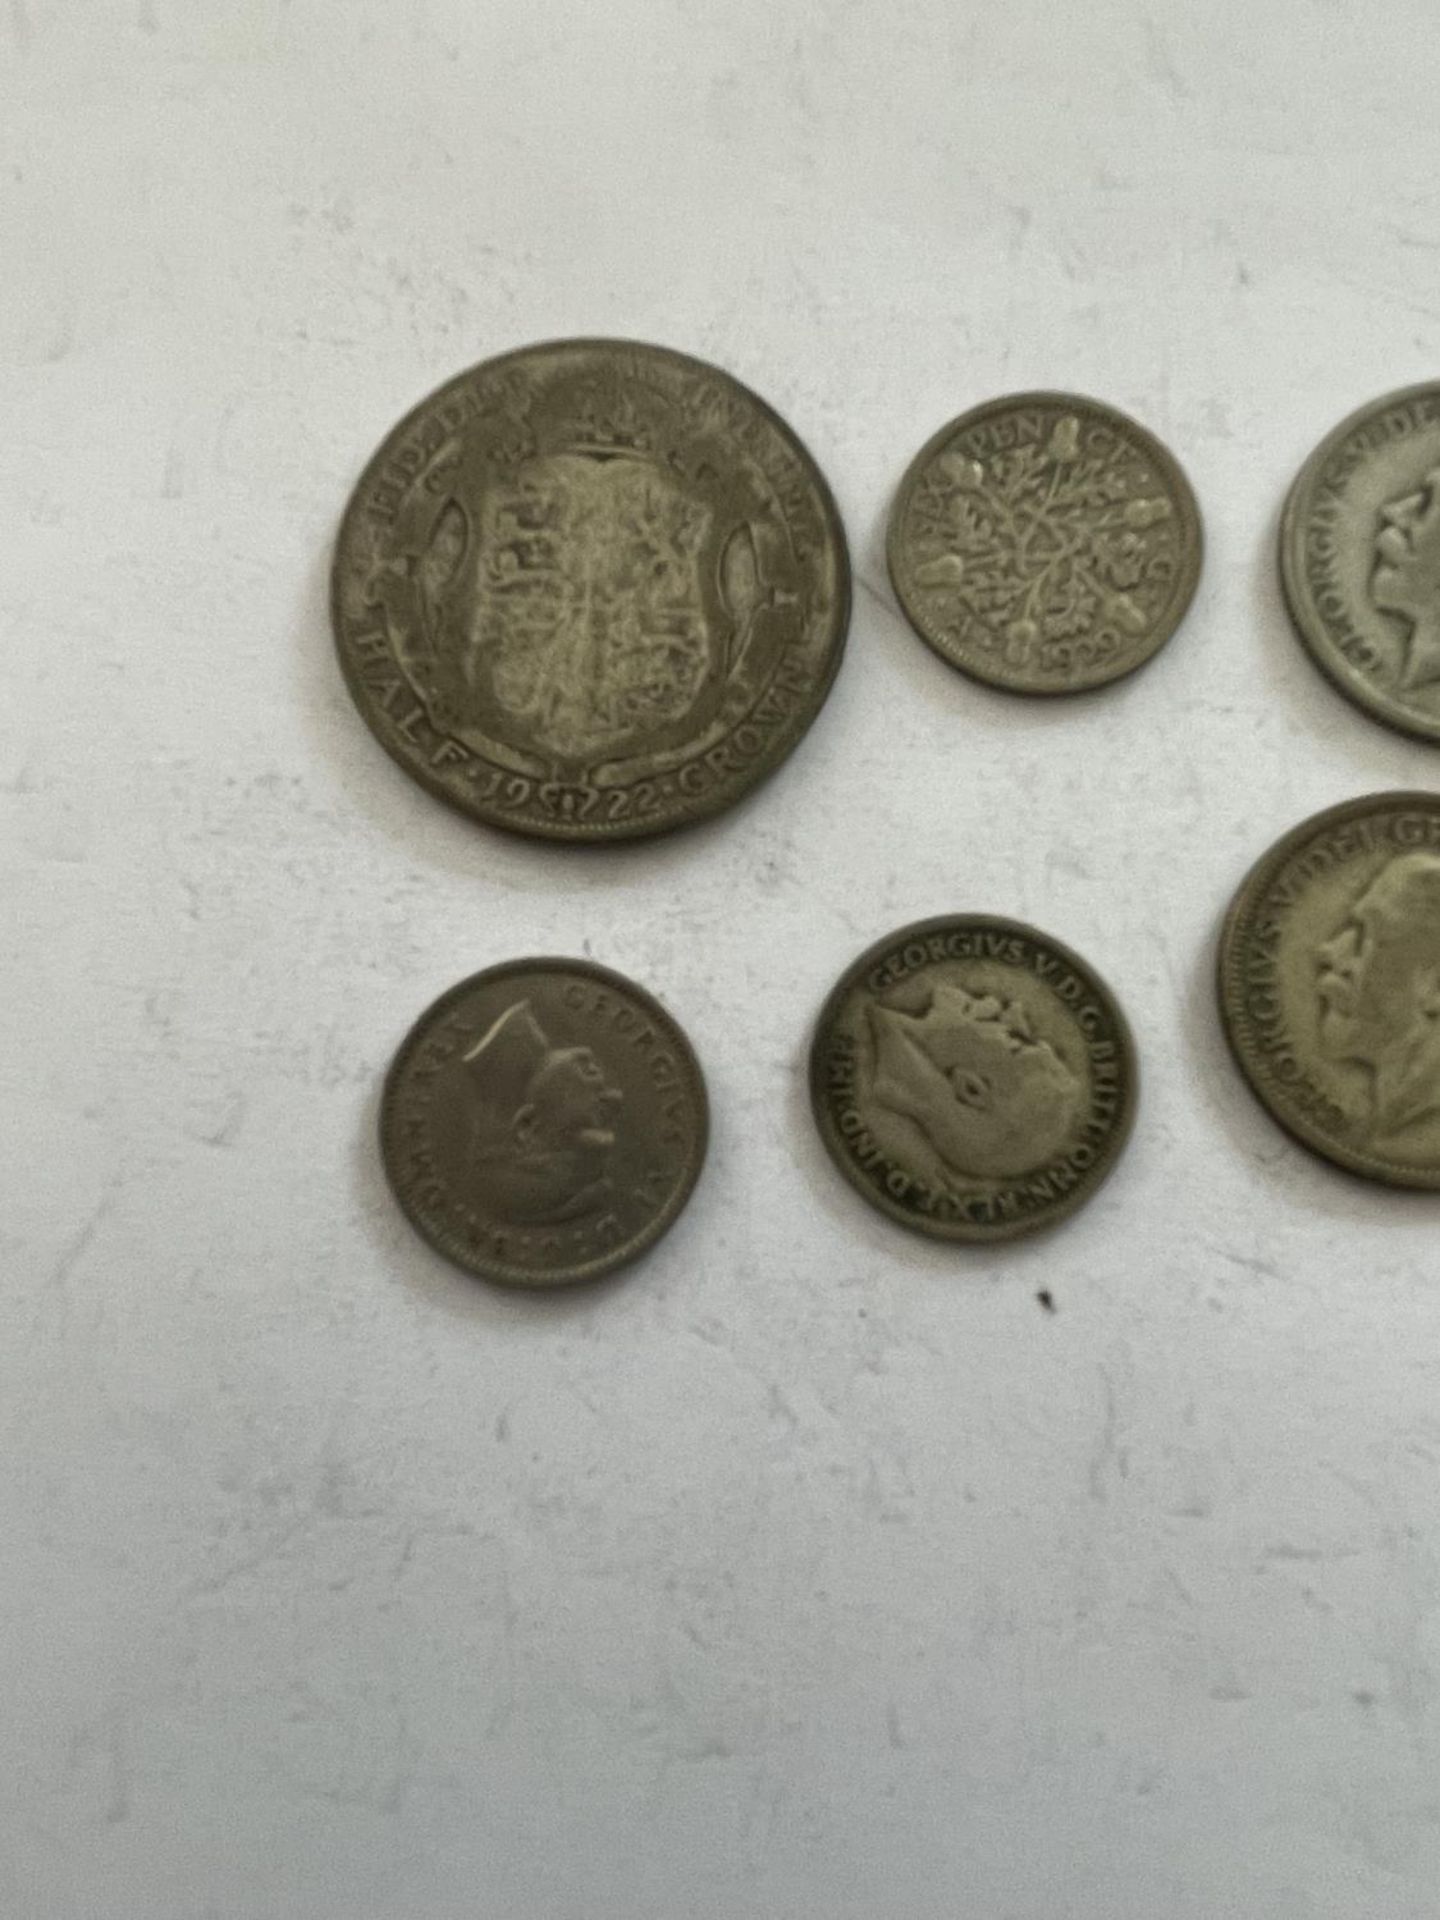 A 1922 HALF CROWN, FOUR PRE 1947 SHILLINGS AND SIX PRE 1947 SIXPENCES - Image 3 of 4